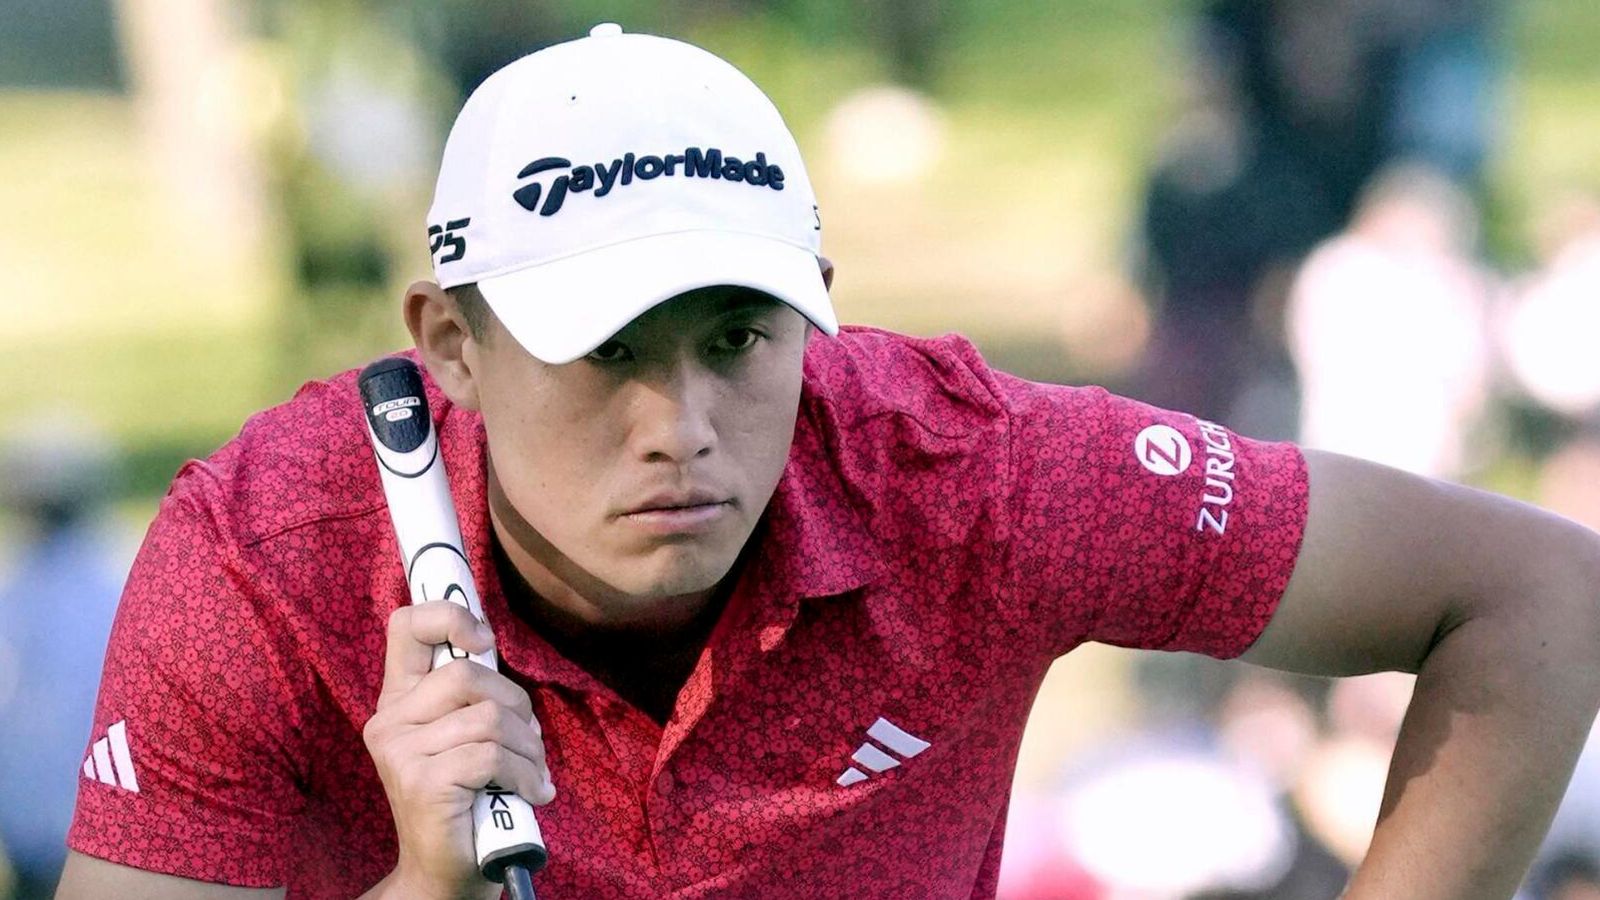 Collin Morikawa will get penalty after Matt Fitzpatrick calls out guidelines breach to PGA Tour official